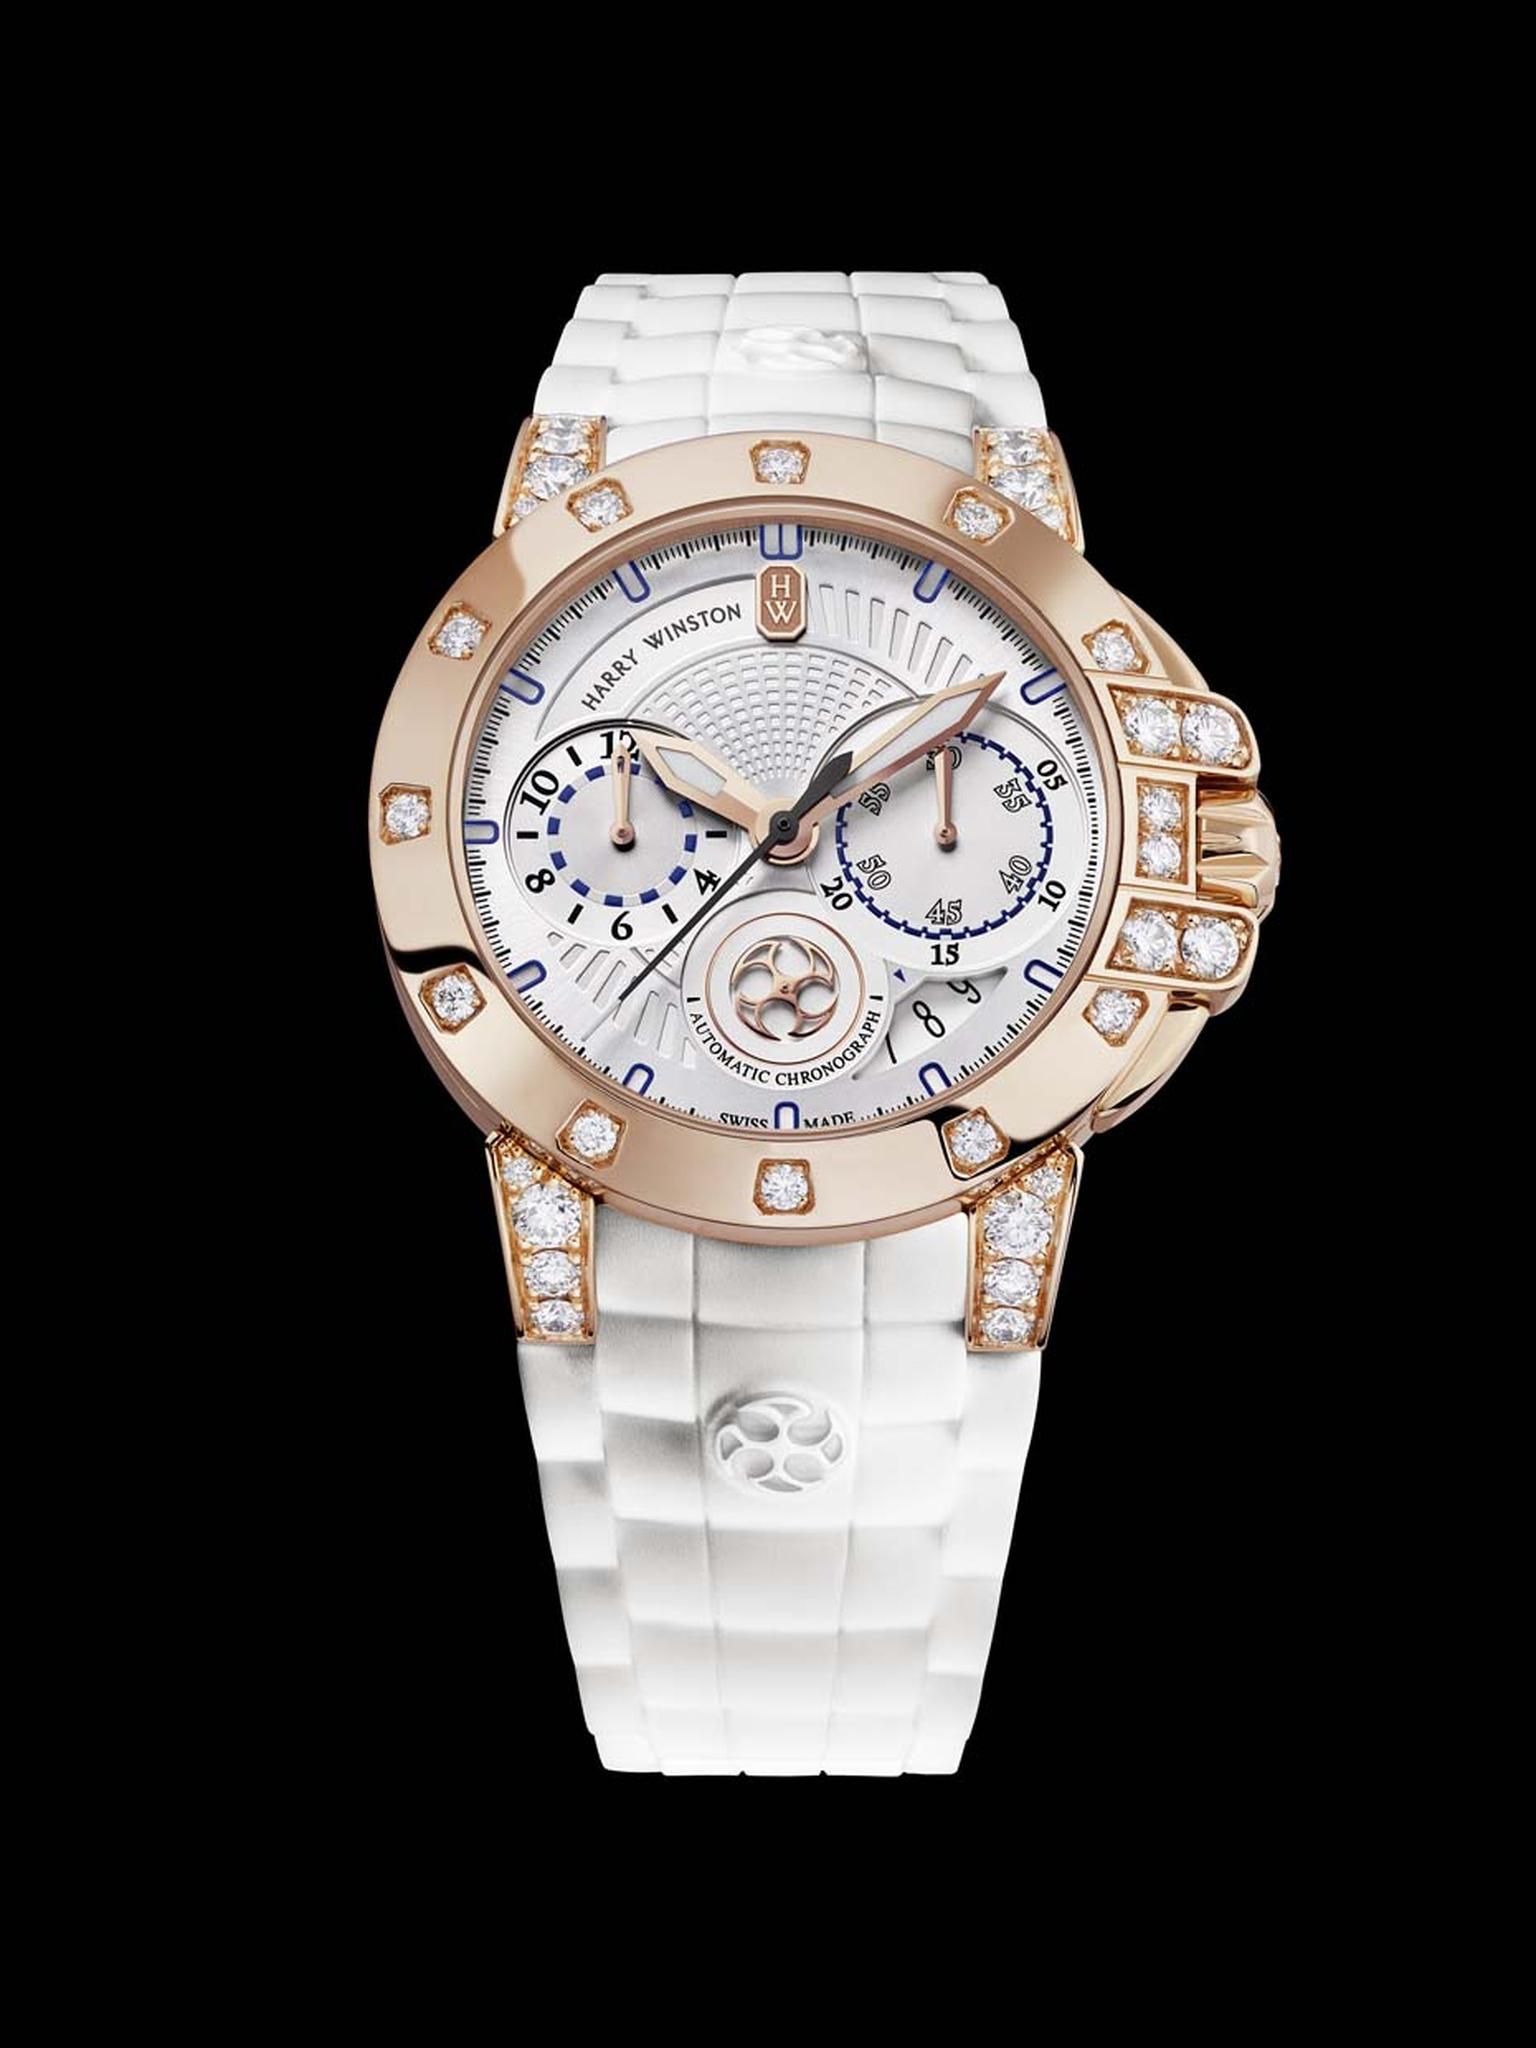 Harry Winston watches Ocean Chronograph Automatic 36mm for ladies is equipped with a high-tech chronograph movement visible through the caseback. The rose gold case is set with 33 brilliant-cut diamonds on the bezel and lugs.